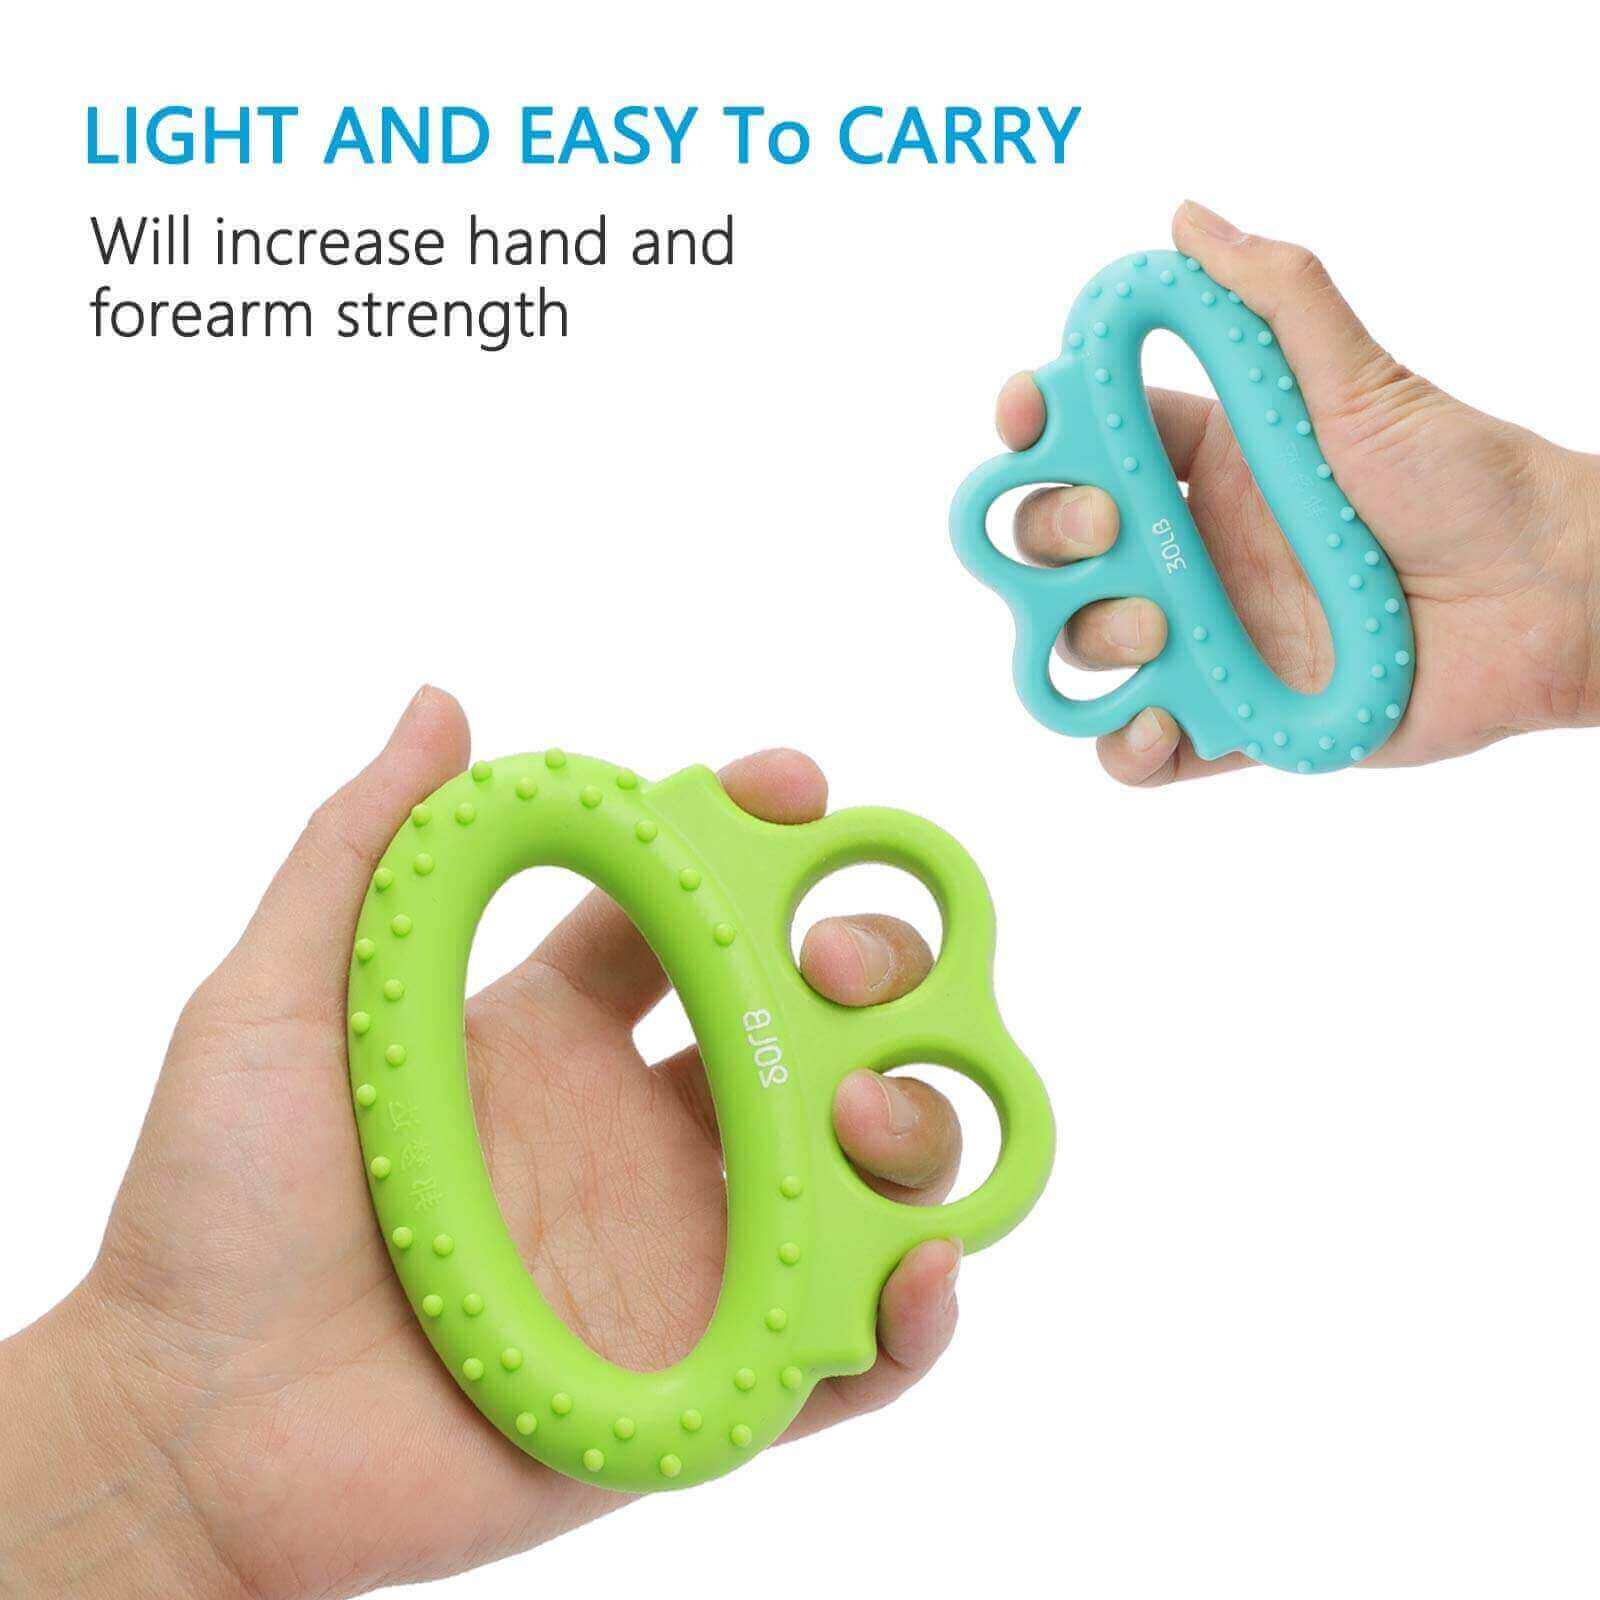 Hand grip ring with finger loops for hand & finger strength exercise, lightweighted